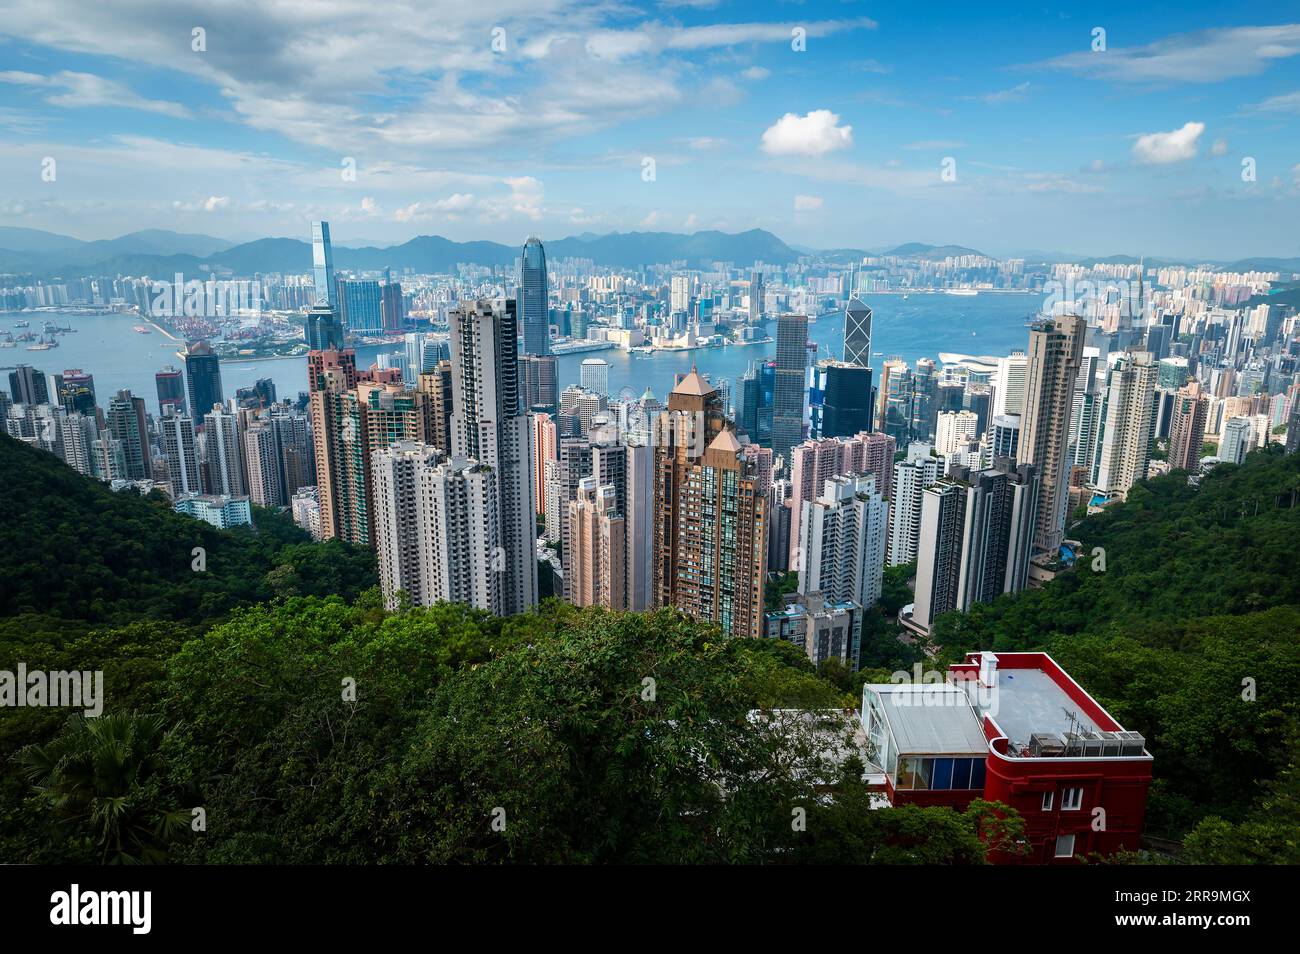 Landmark view of Hong Kong island downtown modern cityscape on a blue sky daytime seen from the Victoria peak rising high above the Special Administra Stock Photo